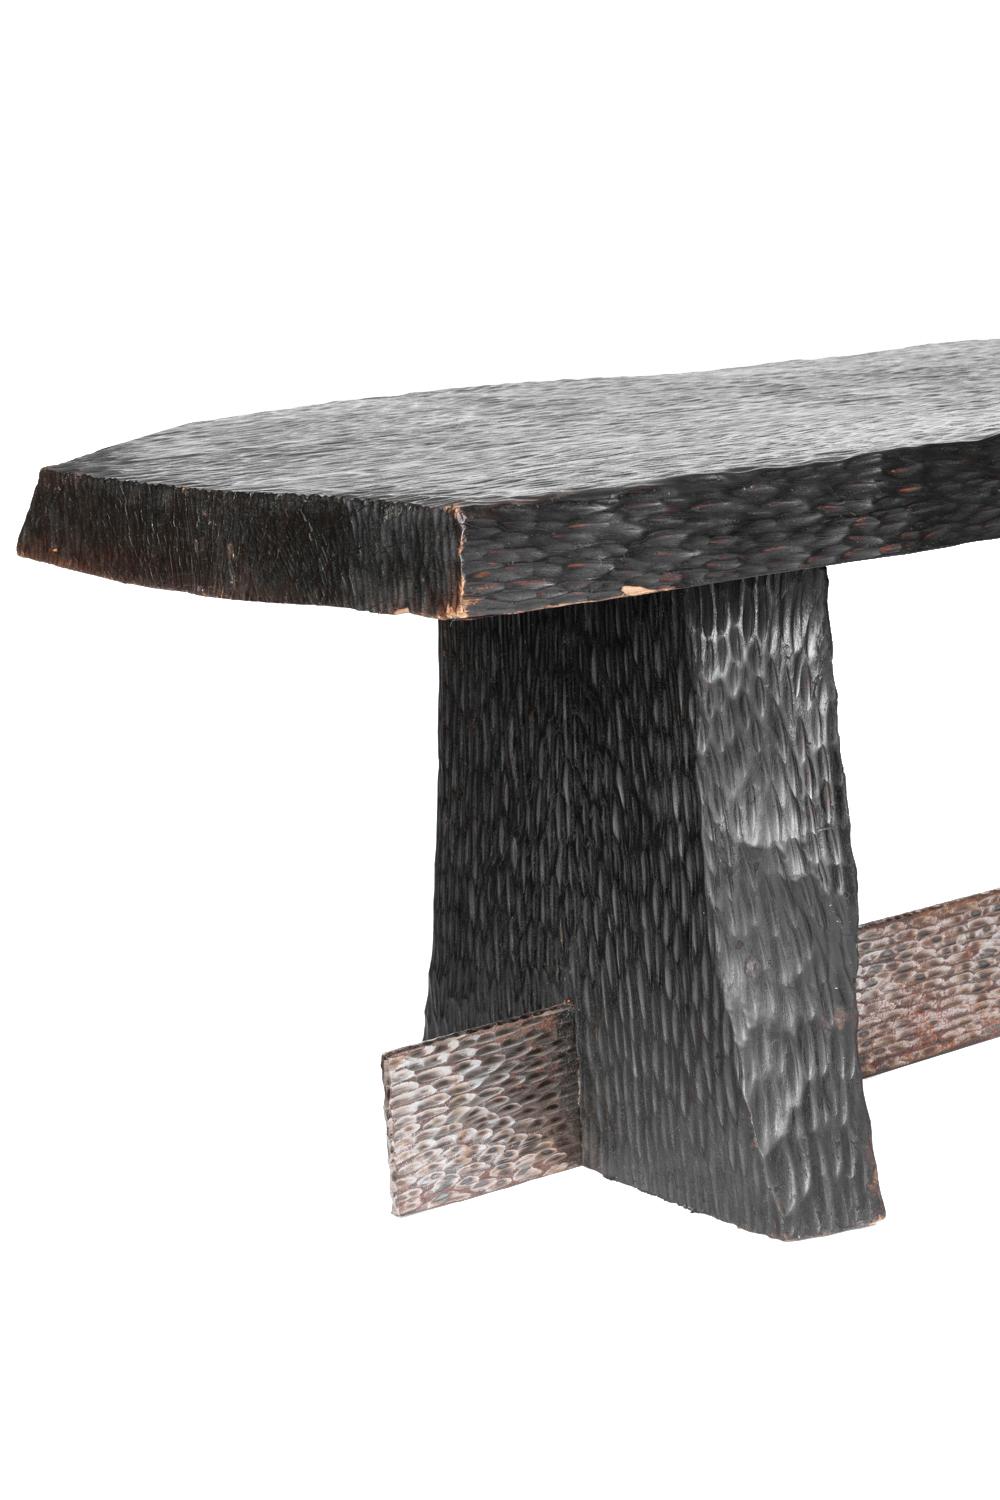 Coffee table standing on legs composed of a blackened gouged wood rectangular leg with bottom flaring and a gouged silvered metal leg with a right-angled corner forming a central stretcher.
Rectangular tray with cut edges in blackened gouged wood